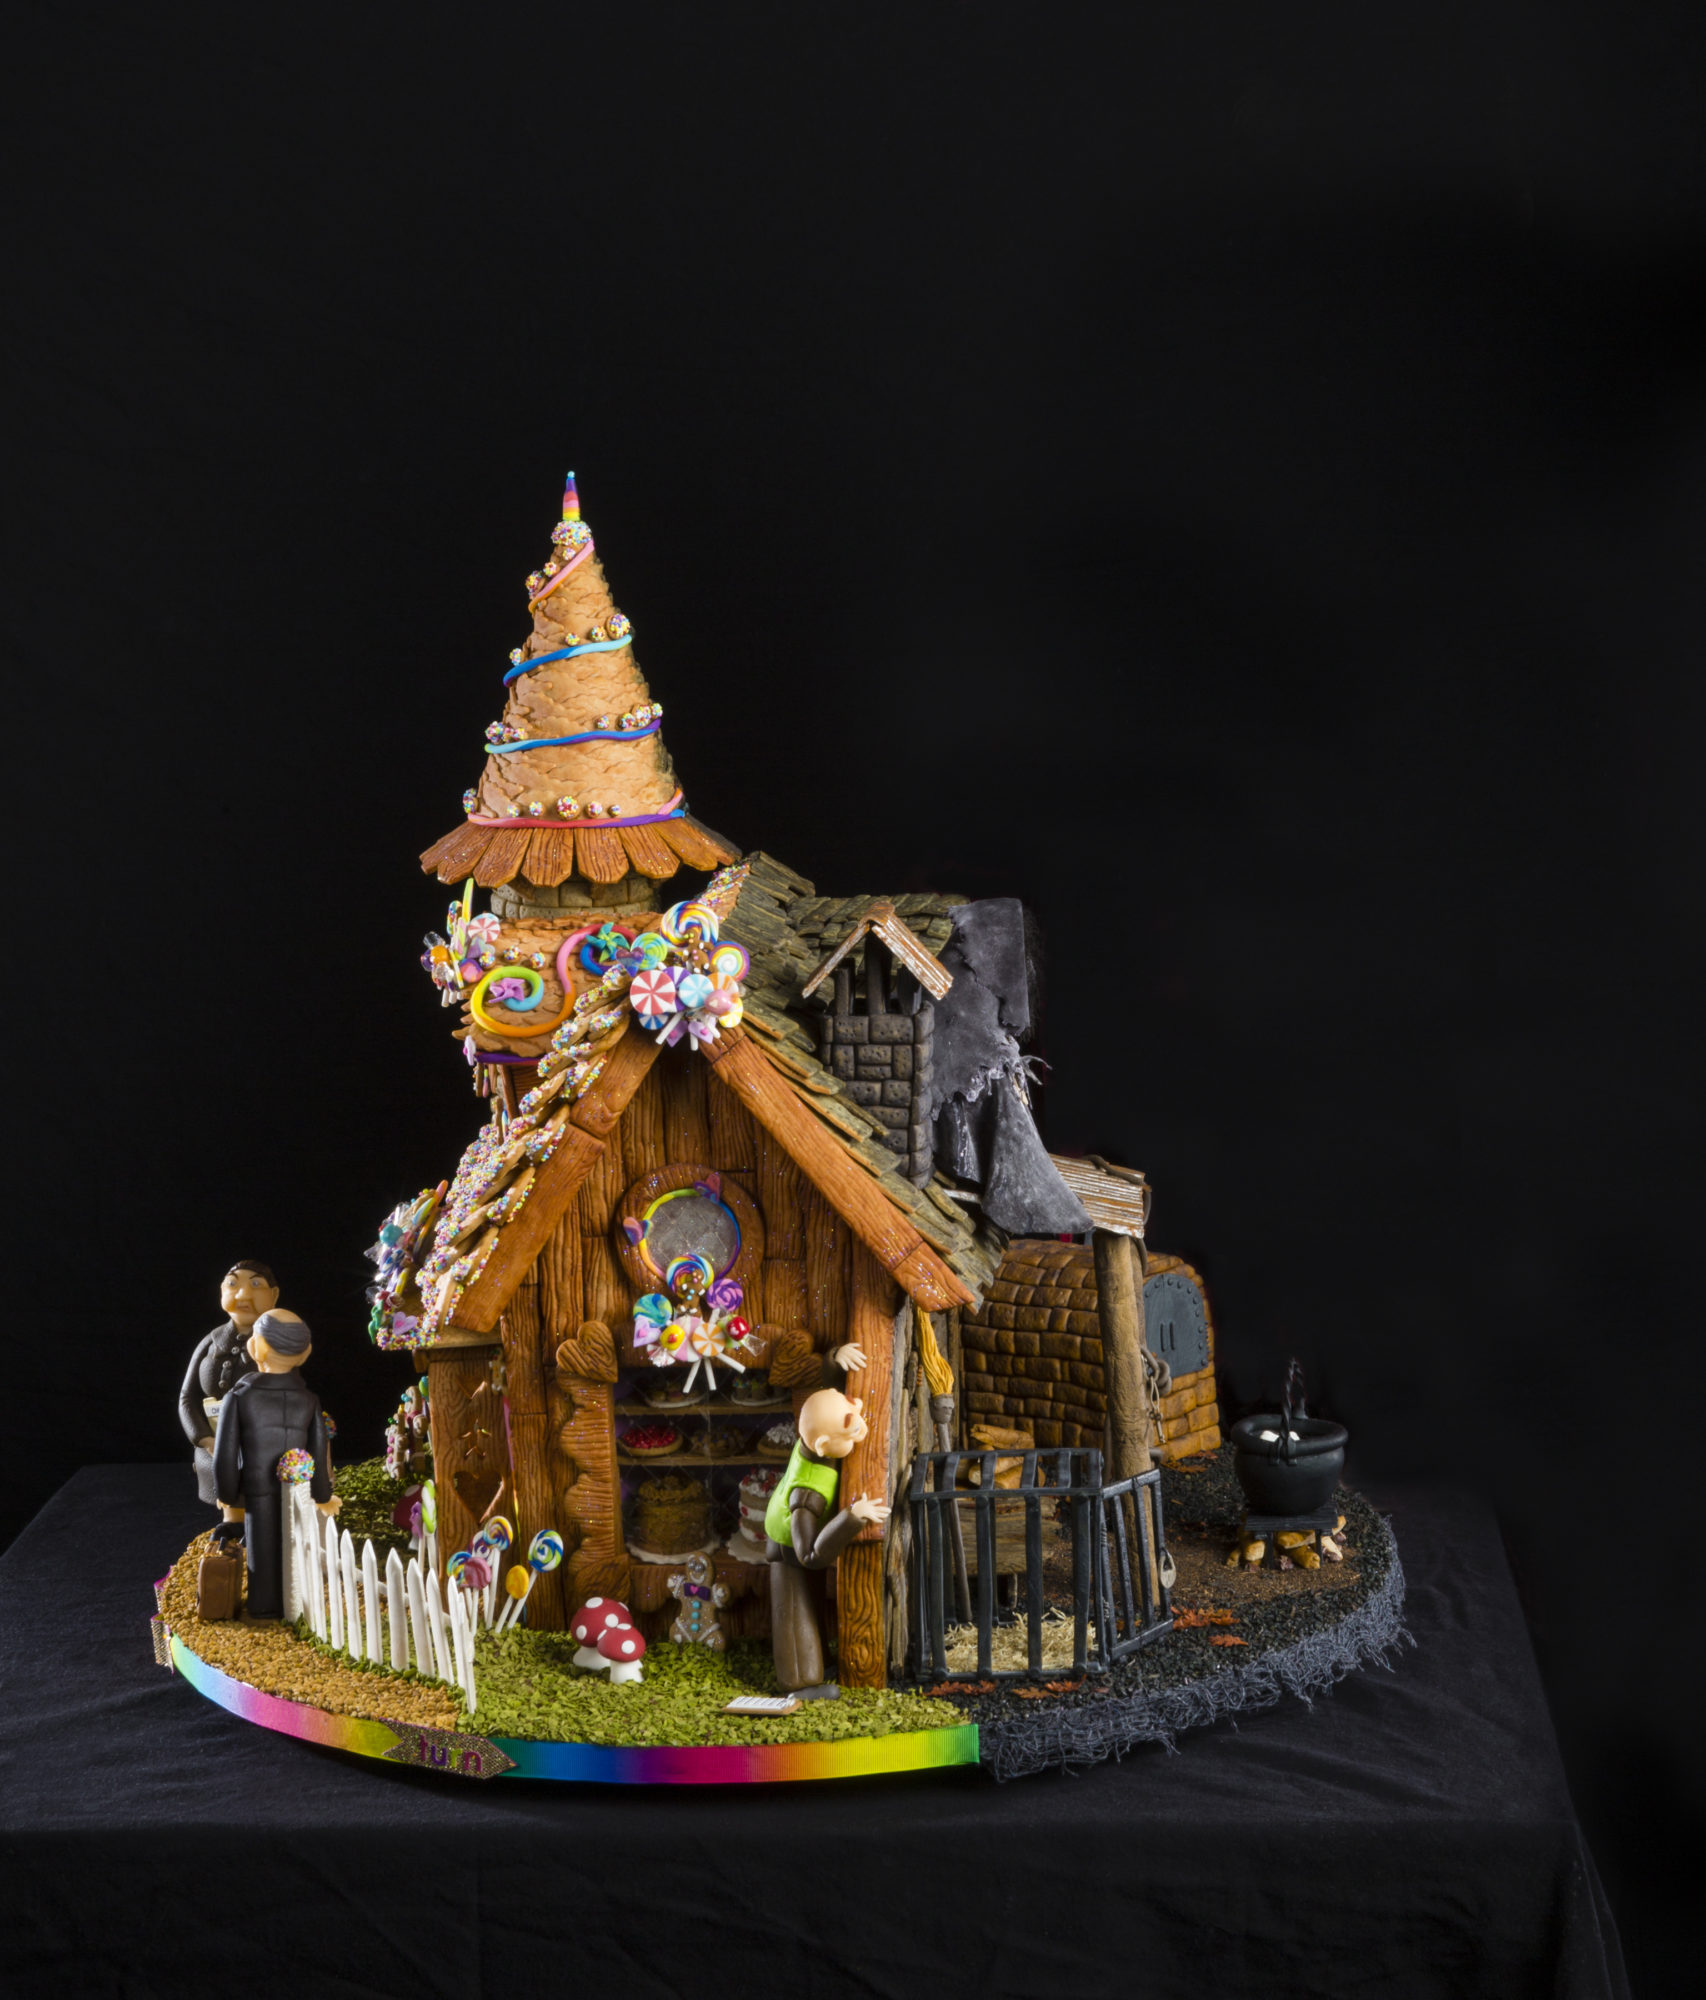 ornate gingerbread house with rainbow elements and three elderly figures